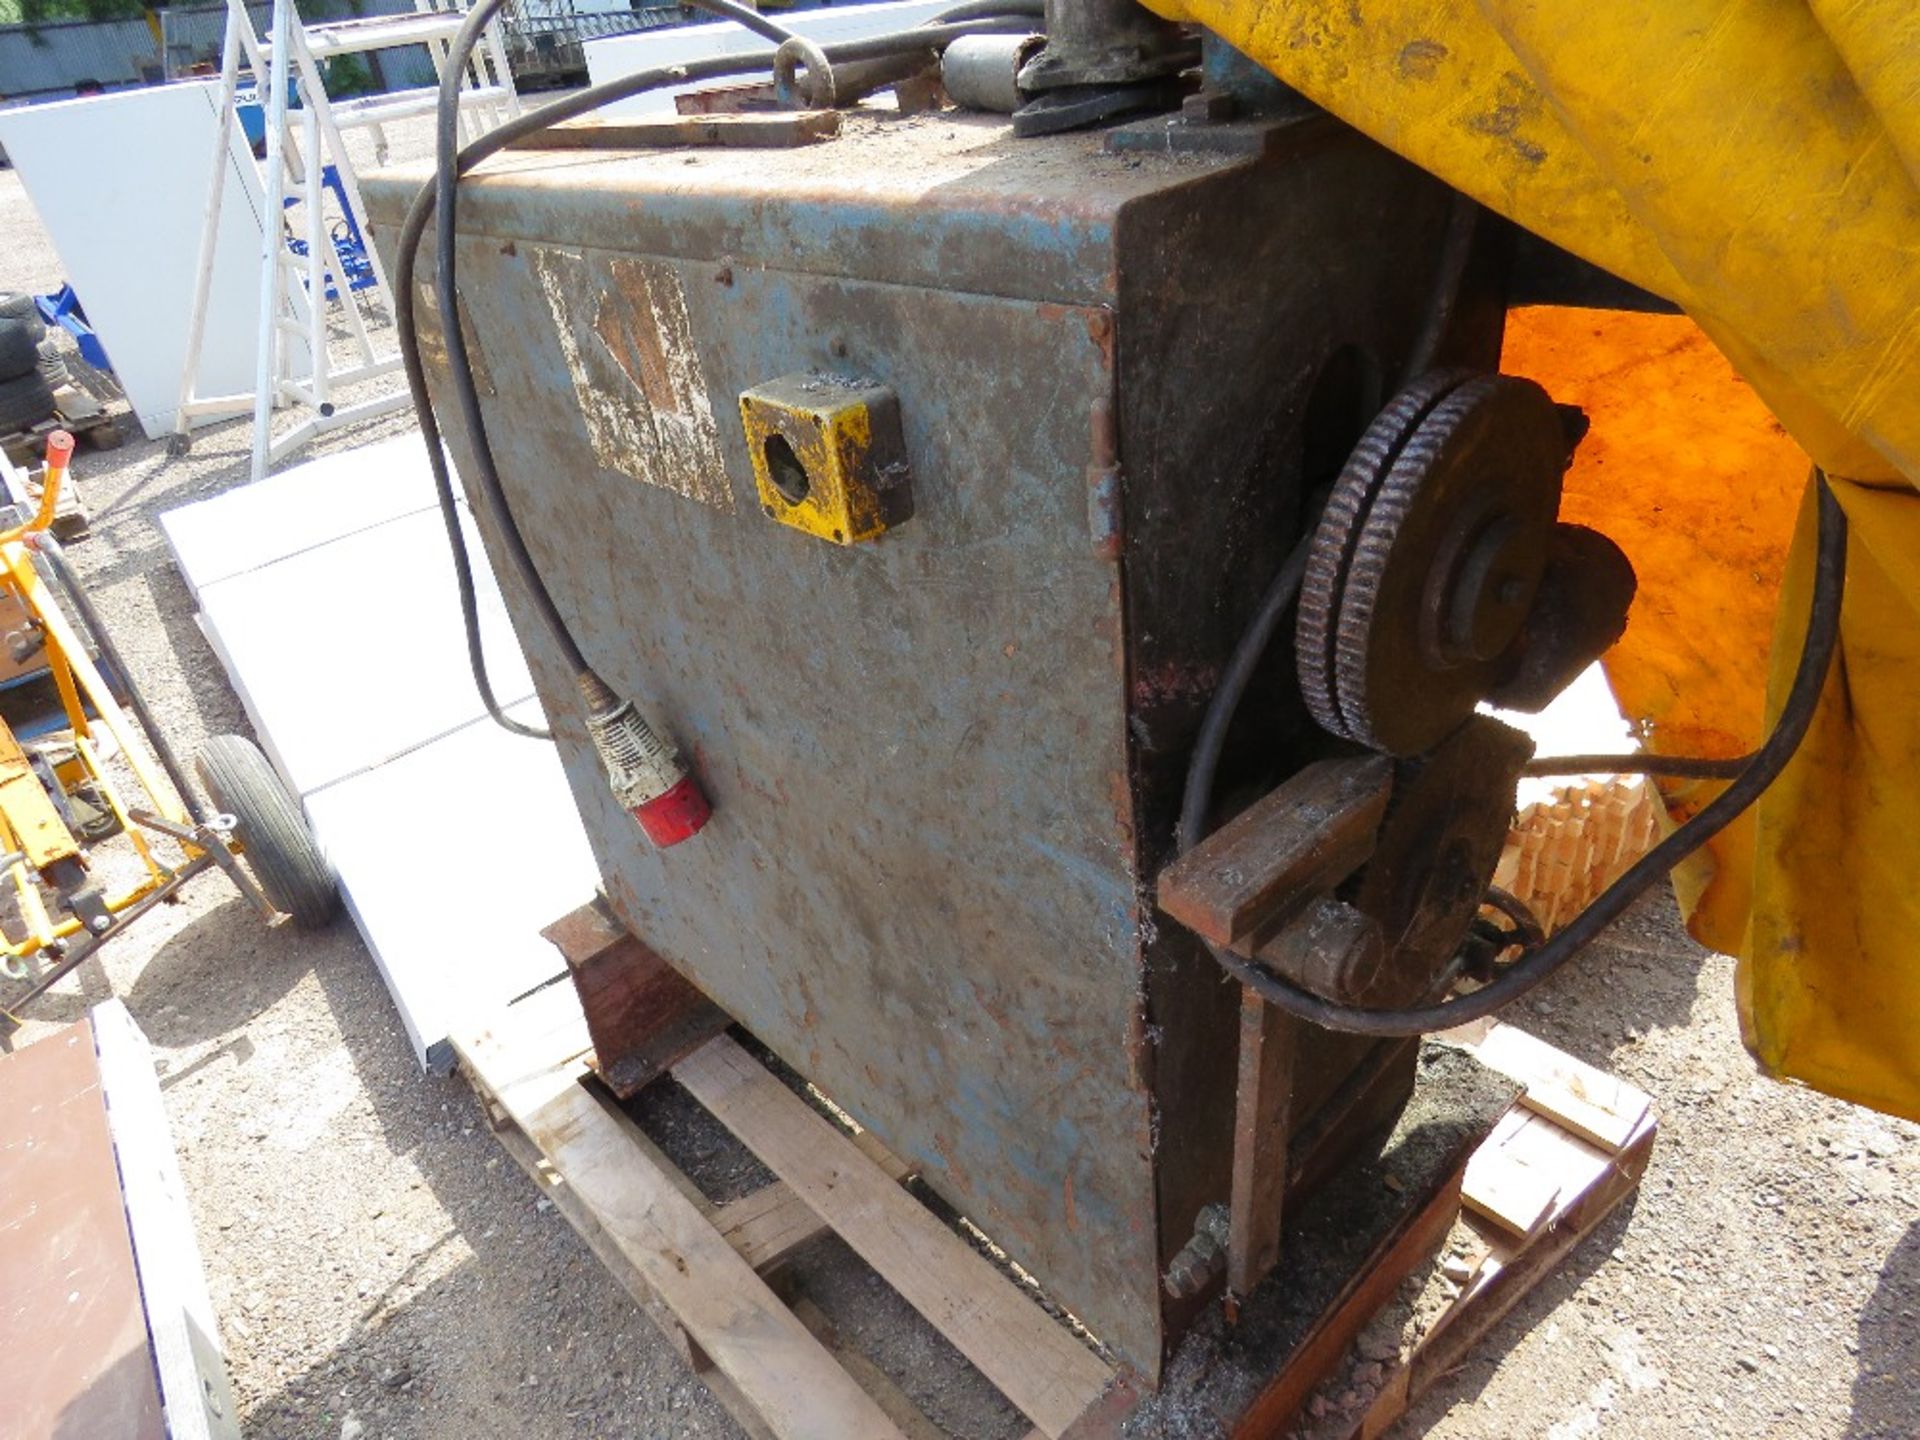 ELDAN M3 CABLE STRIPPER UNIT, 3 PHASE. WORKING WHEN REMOVED. NO VAT ON HAMMER PRICE.